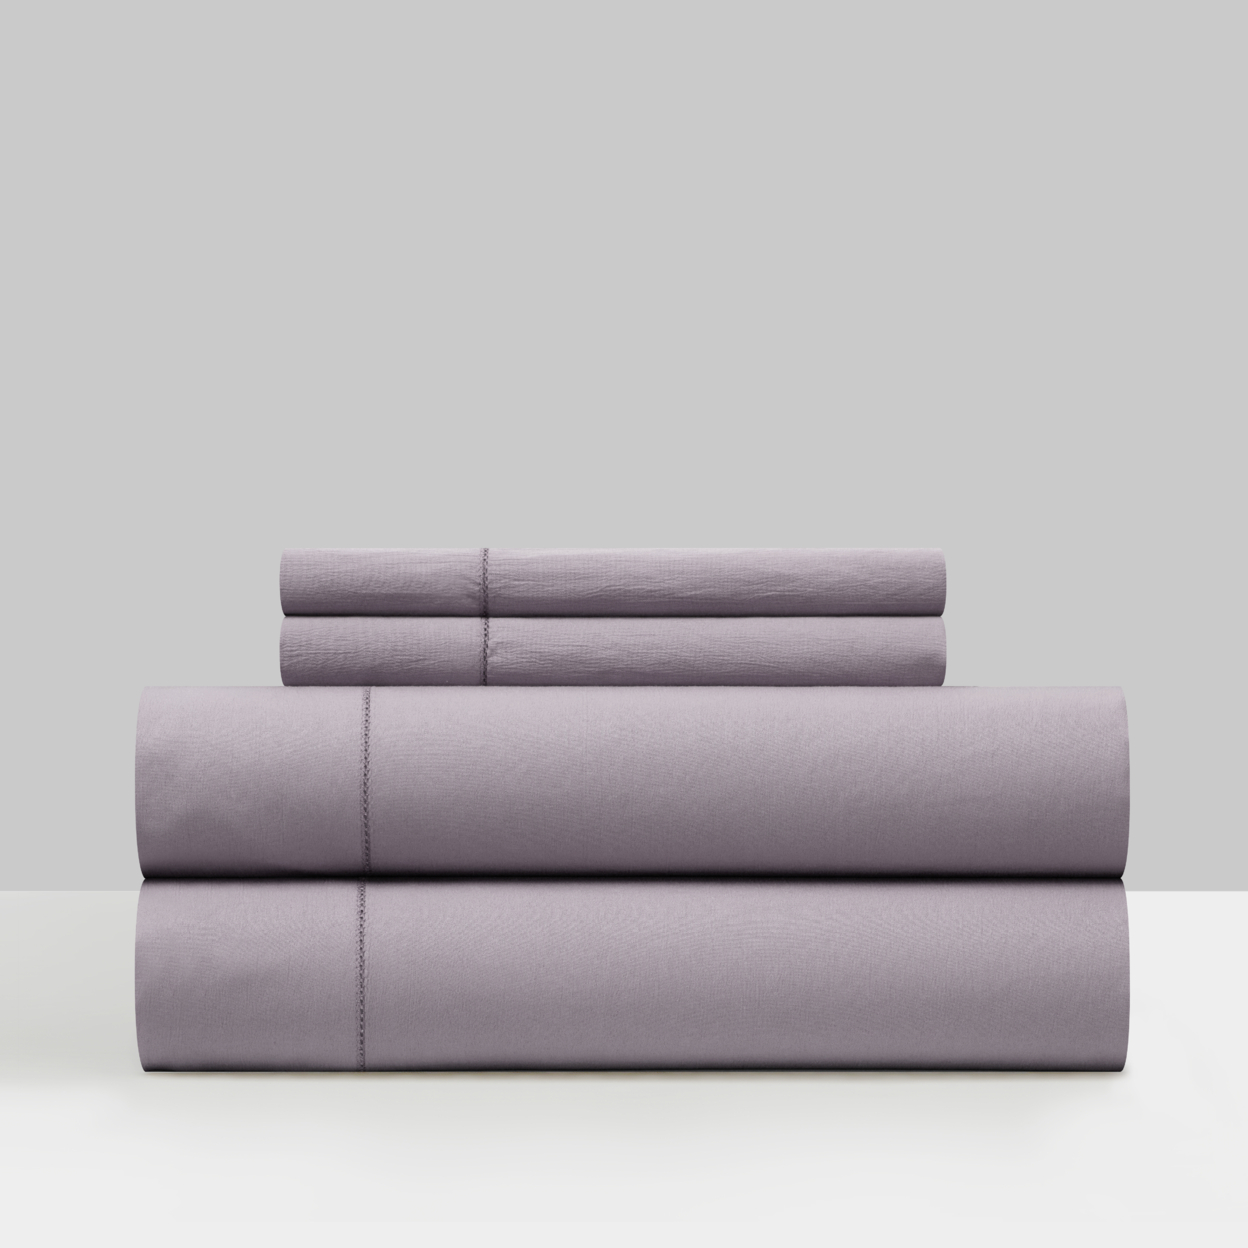 Daisy 3 Or 4 Piece Sheet Set Solid Color Washed Garment Technique - Grey, Queen